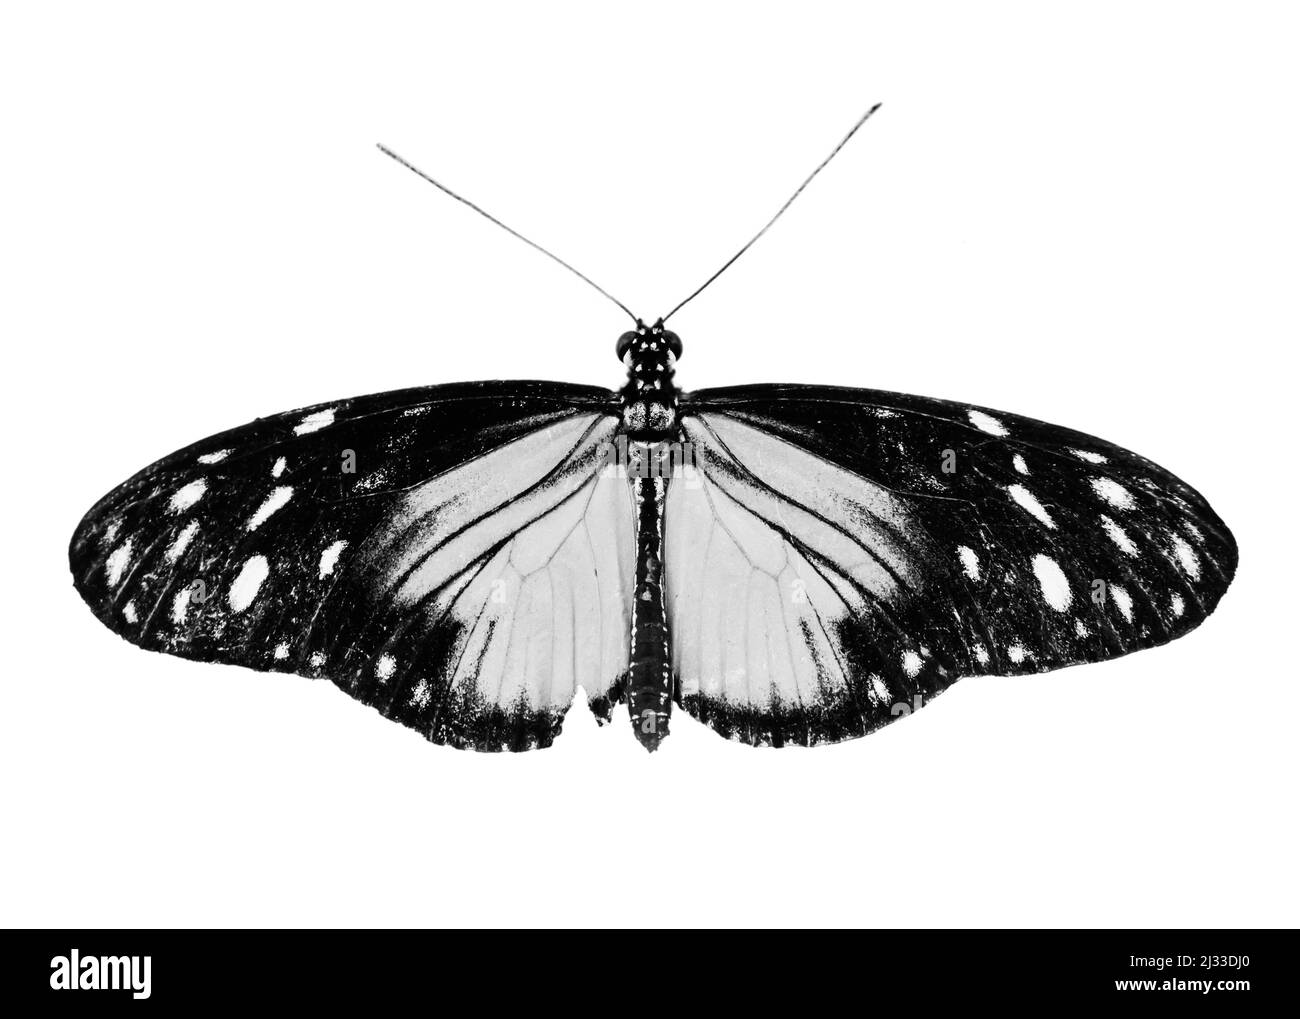 Black and white image of a butterfly Stock Photo